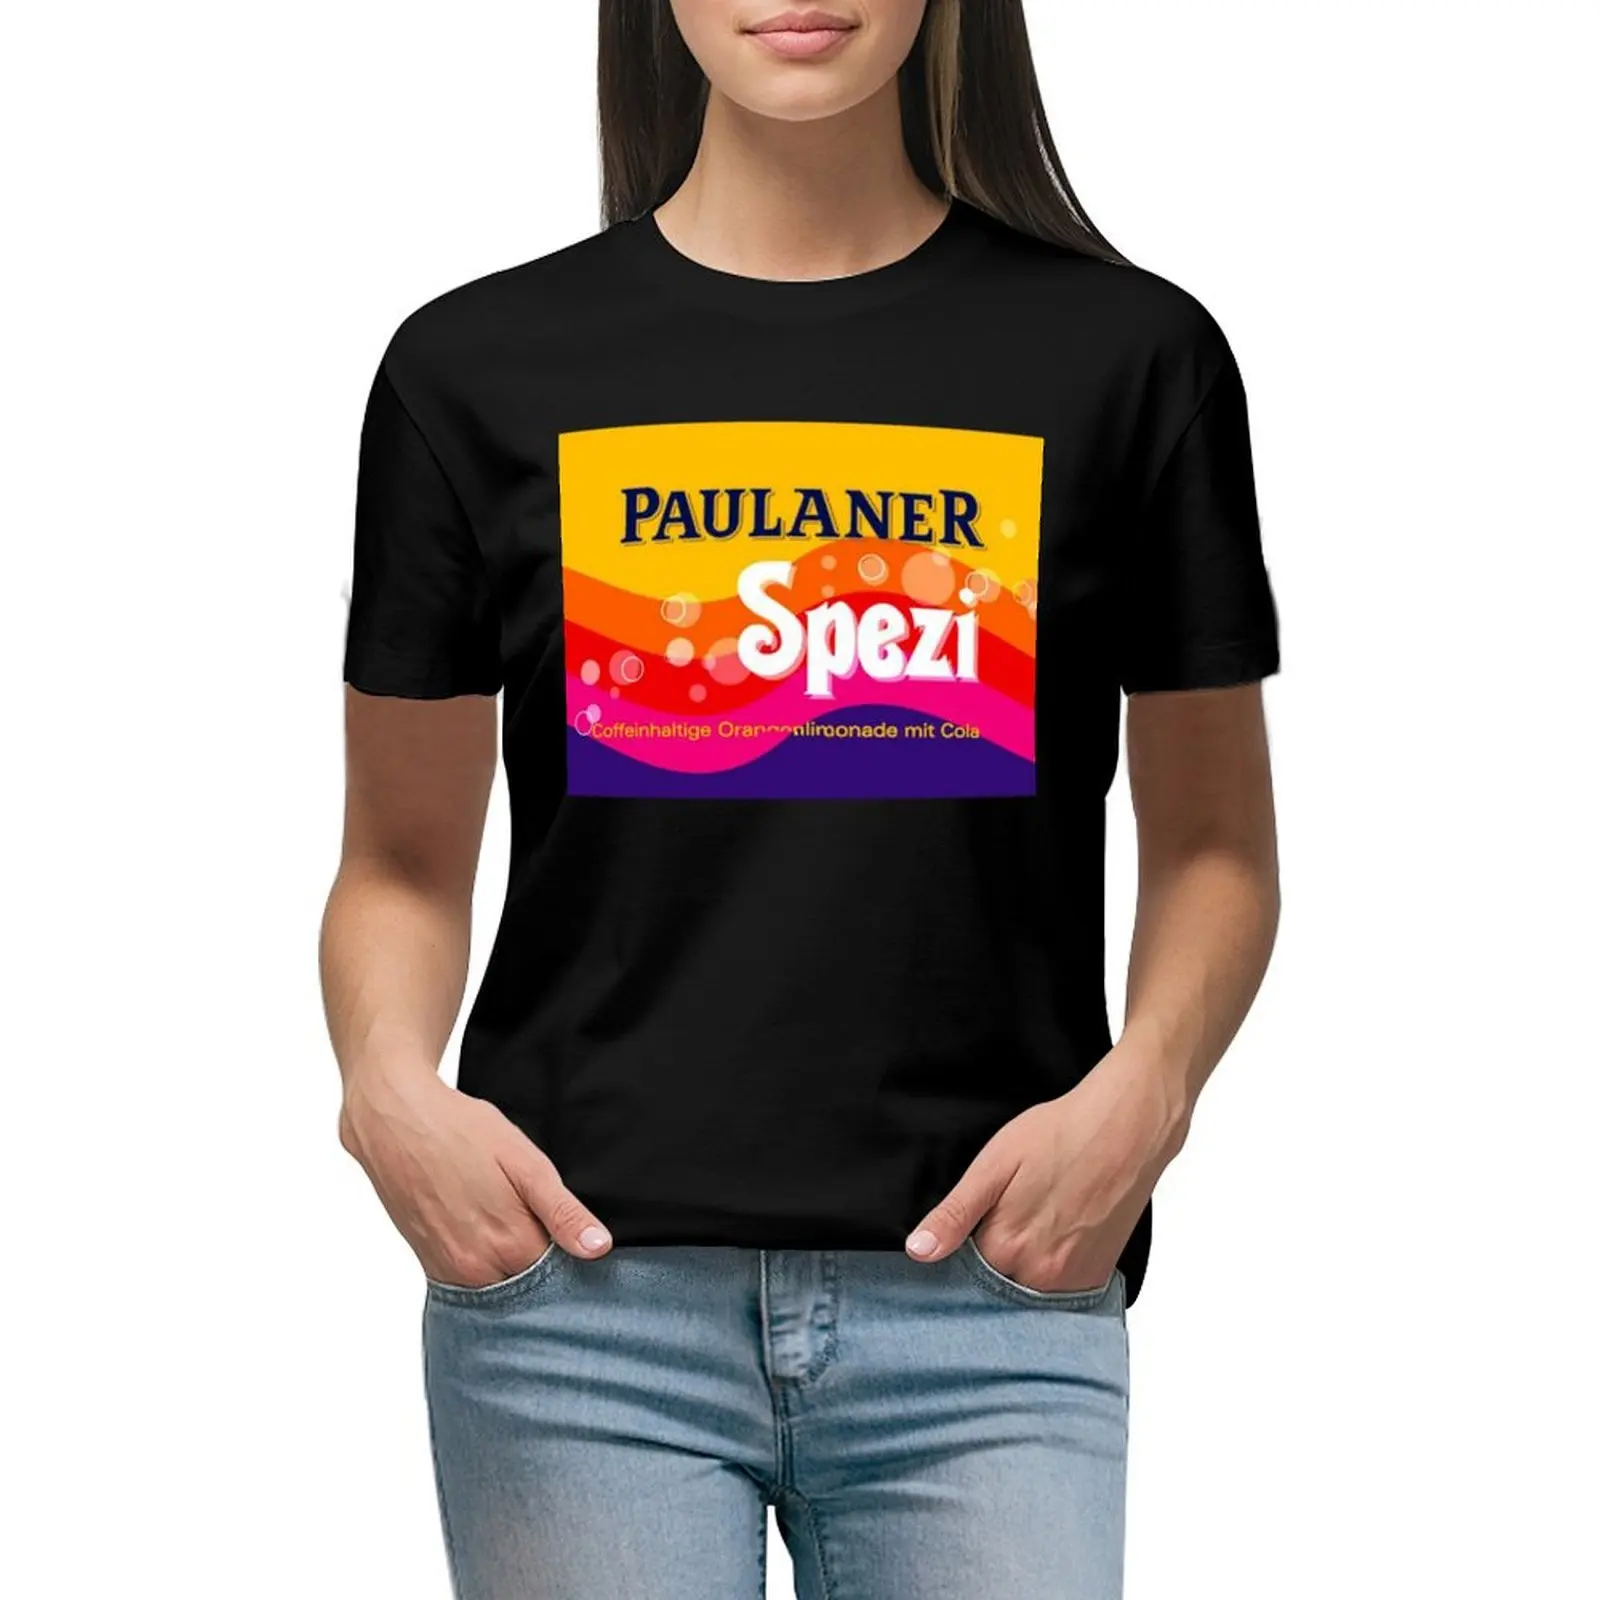 

Paulaner Spezi T-shirt hippie clothes Short sleeve tee summer top cropped t shirts for Women